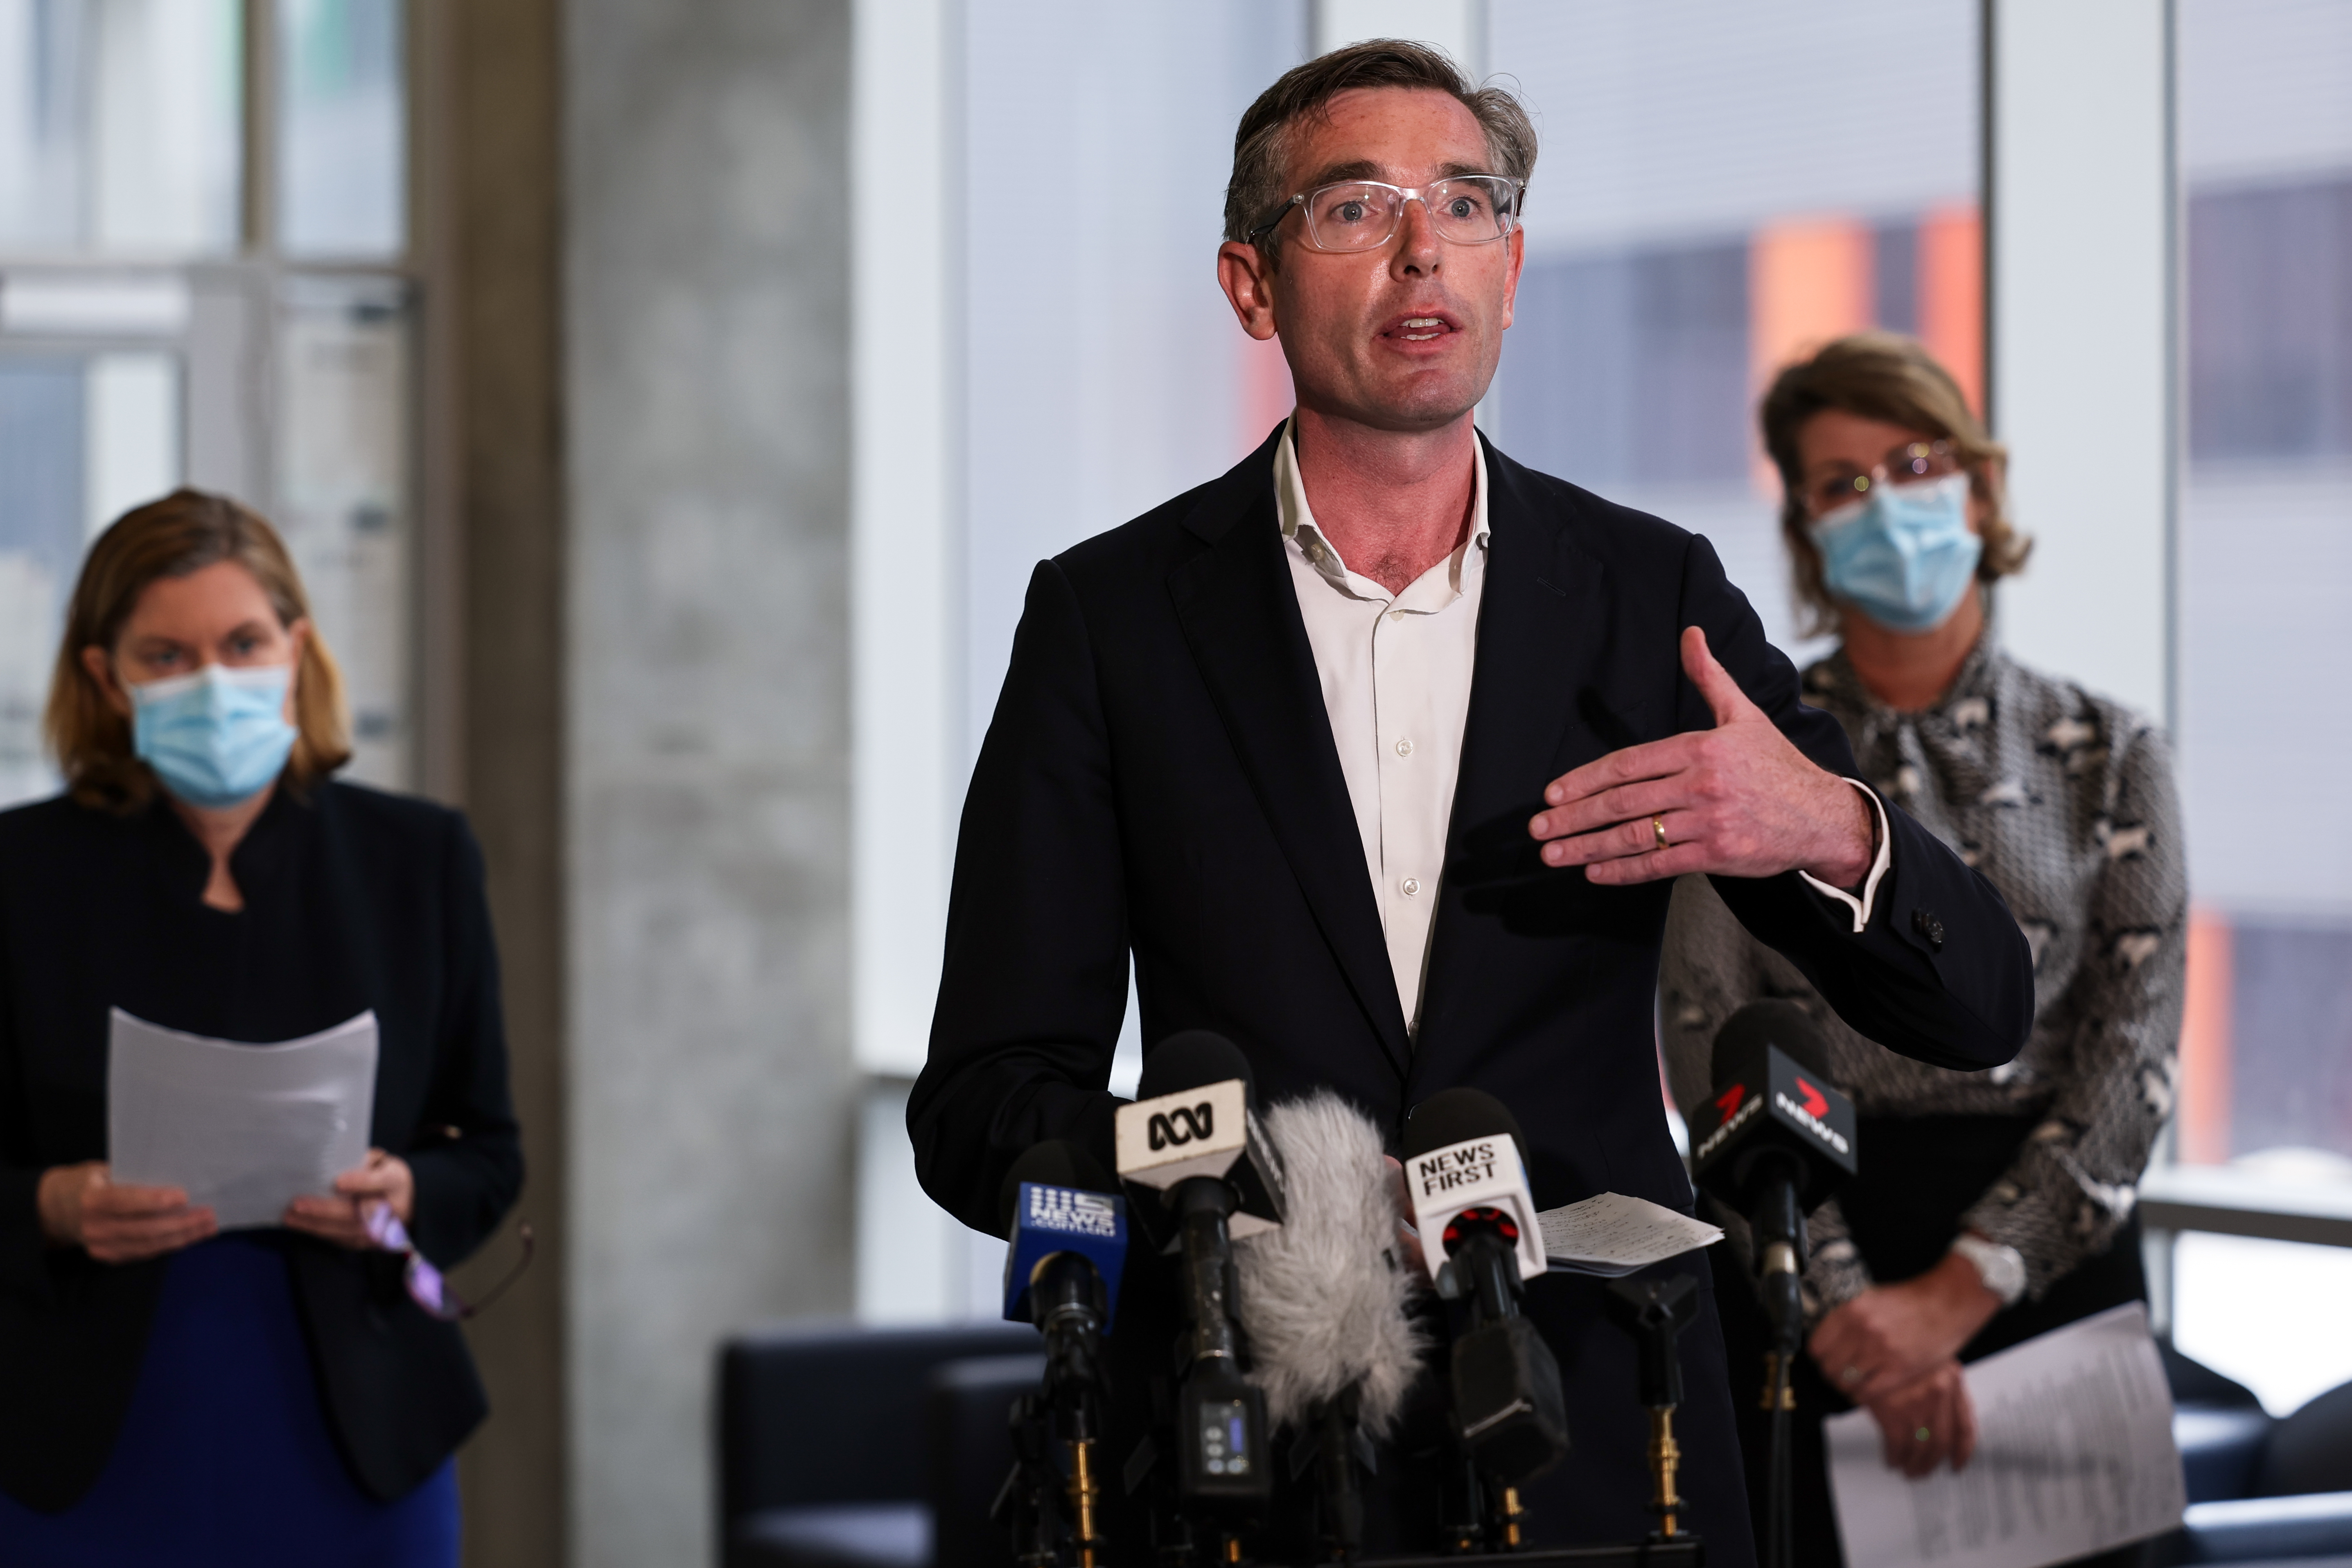 NSW Premier Dominic Perrottet (centre) speaks to the media during a press conference in Sydney, Friday, January 7, 2022. NSW has halted singing in clubs and pubs for three weeks and will impose a triple-vaccination mandate for some people as it tries to slow the Omicron wave.